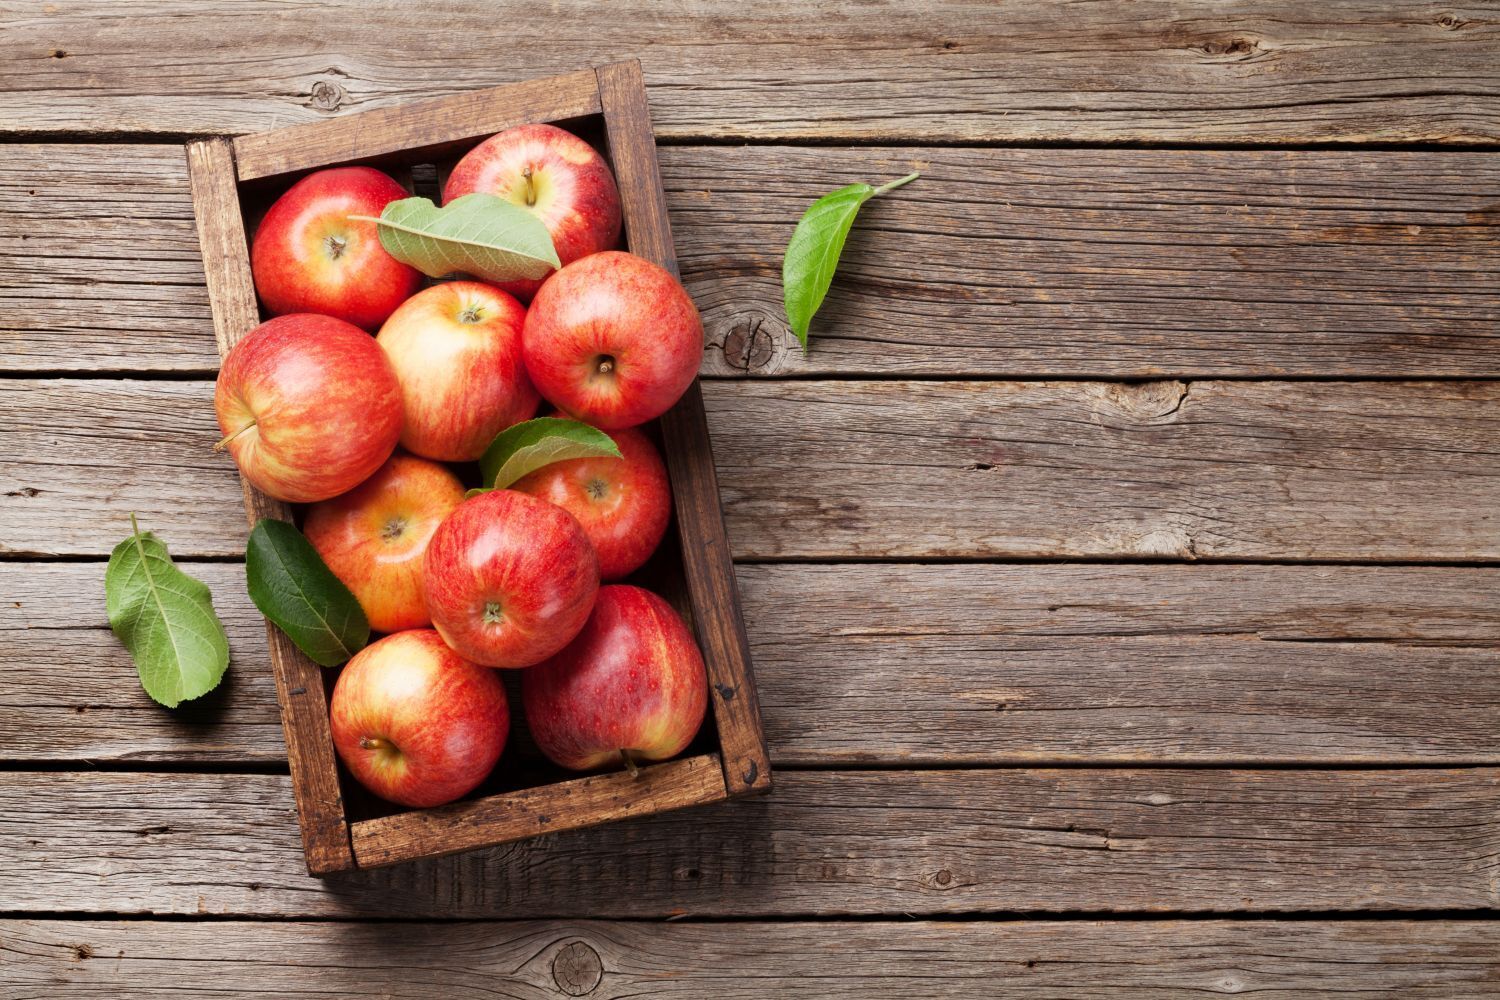 Why apples are good for you